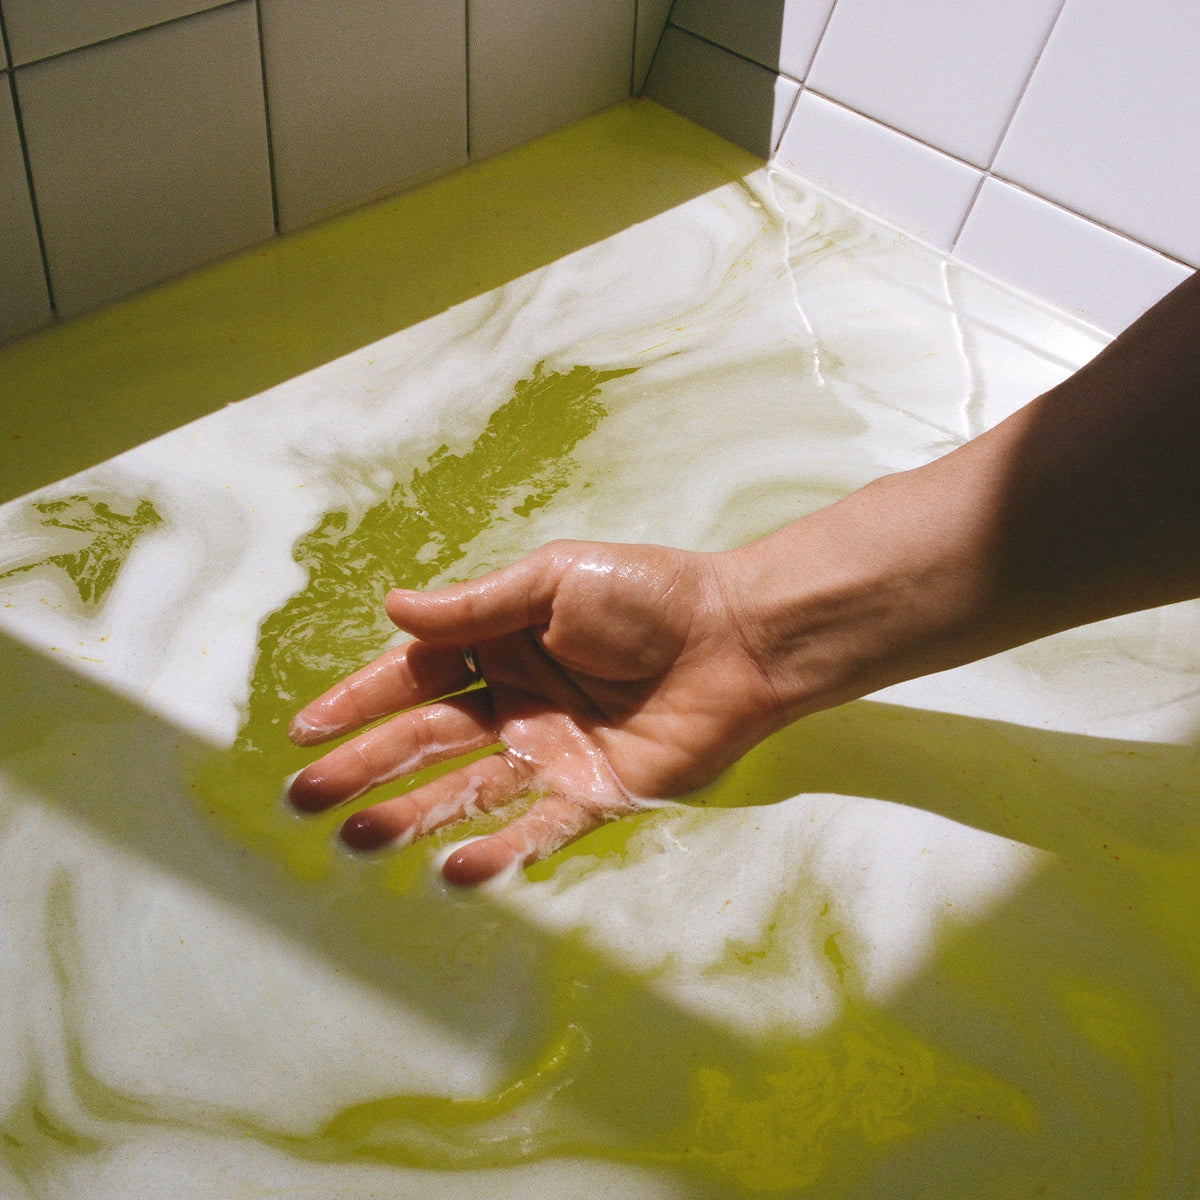 A hand touching a yellow-green colored water with THE FULLEST Exheal salt in a sunlit bathtub.